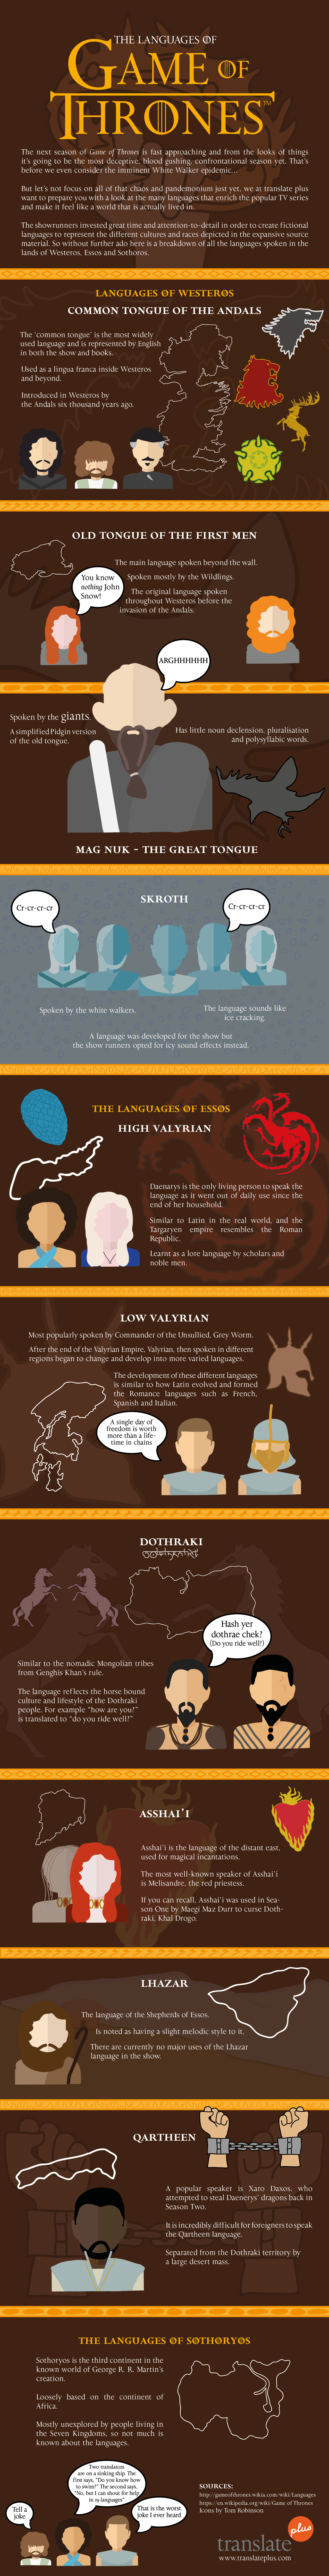 The languages of Game of Thrones - infographic